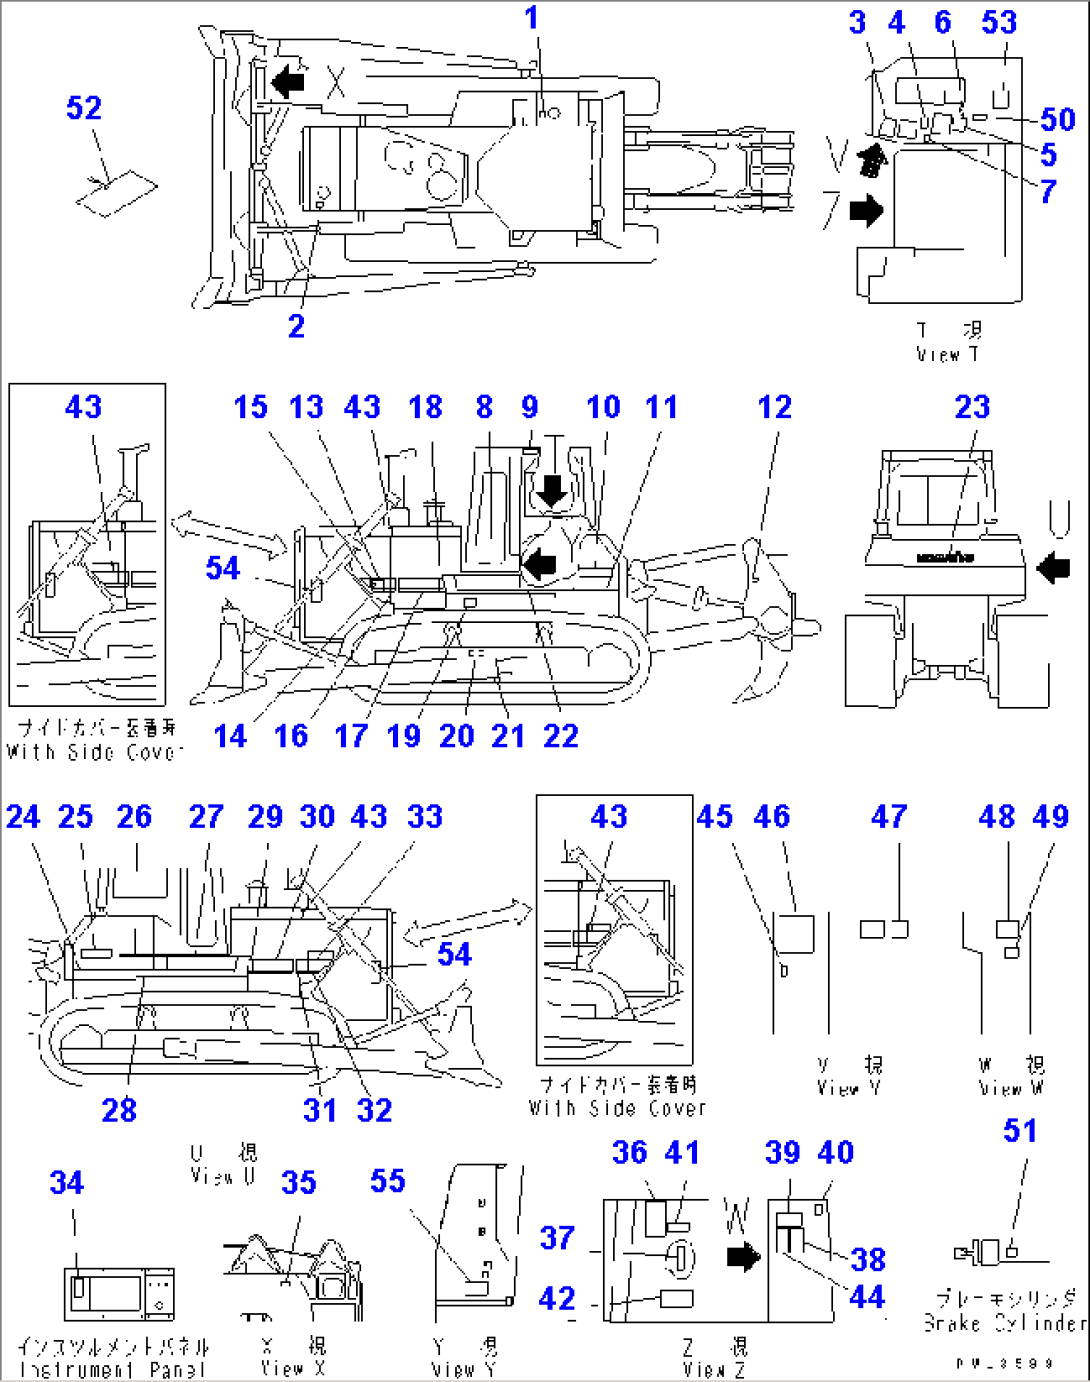 MARKS AND PLATES (INDONESIAN)(#53135-)